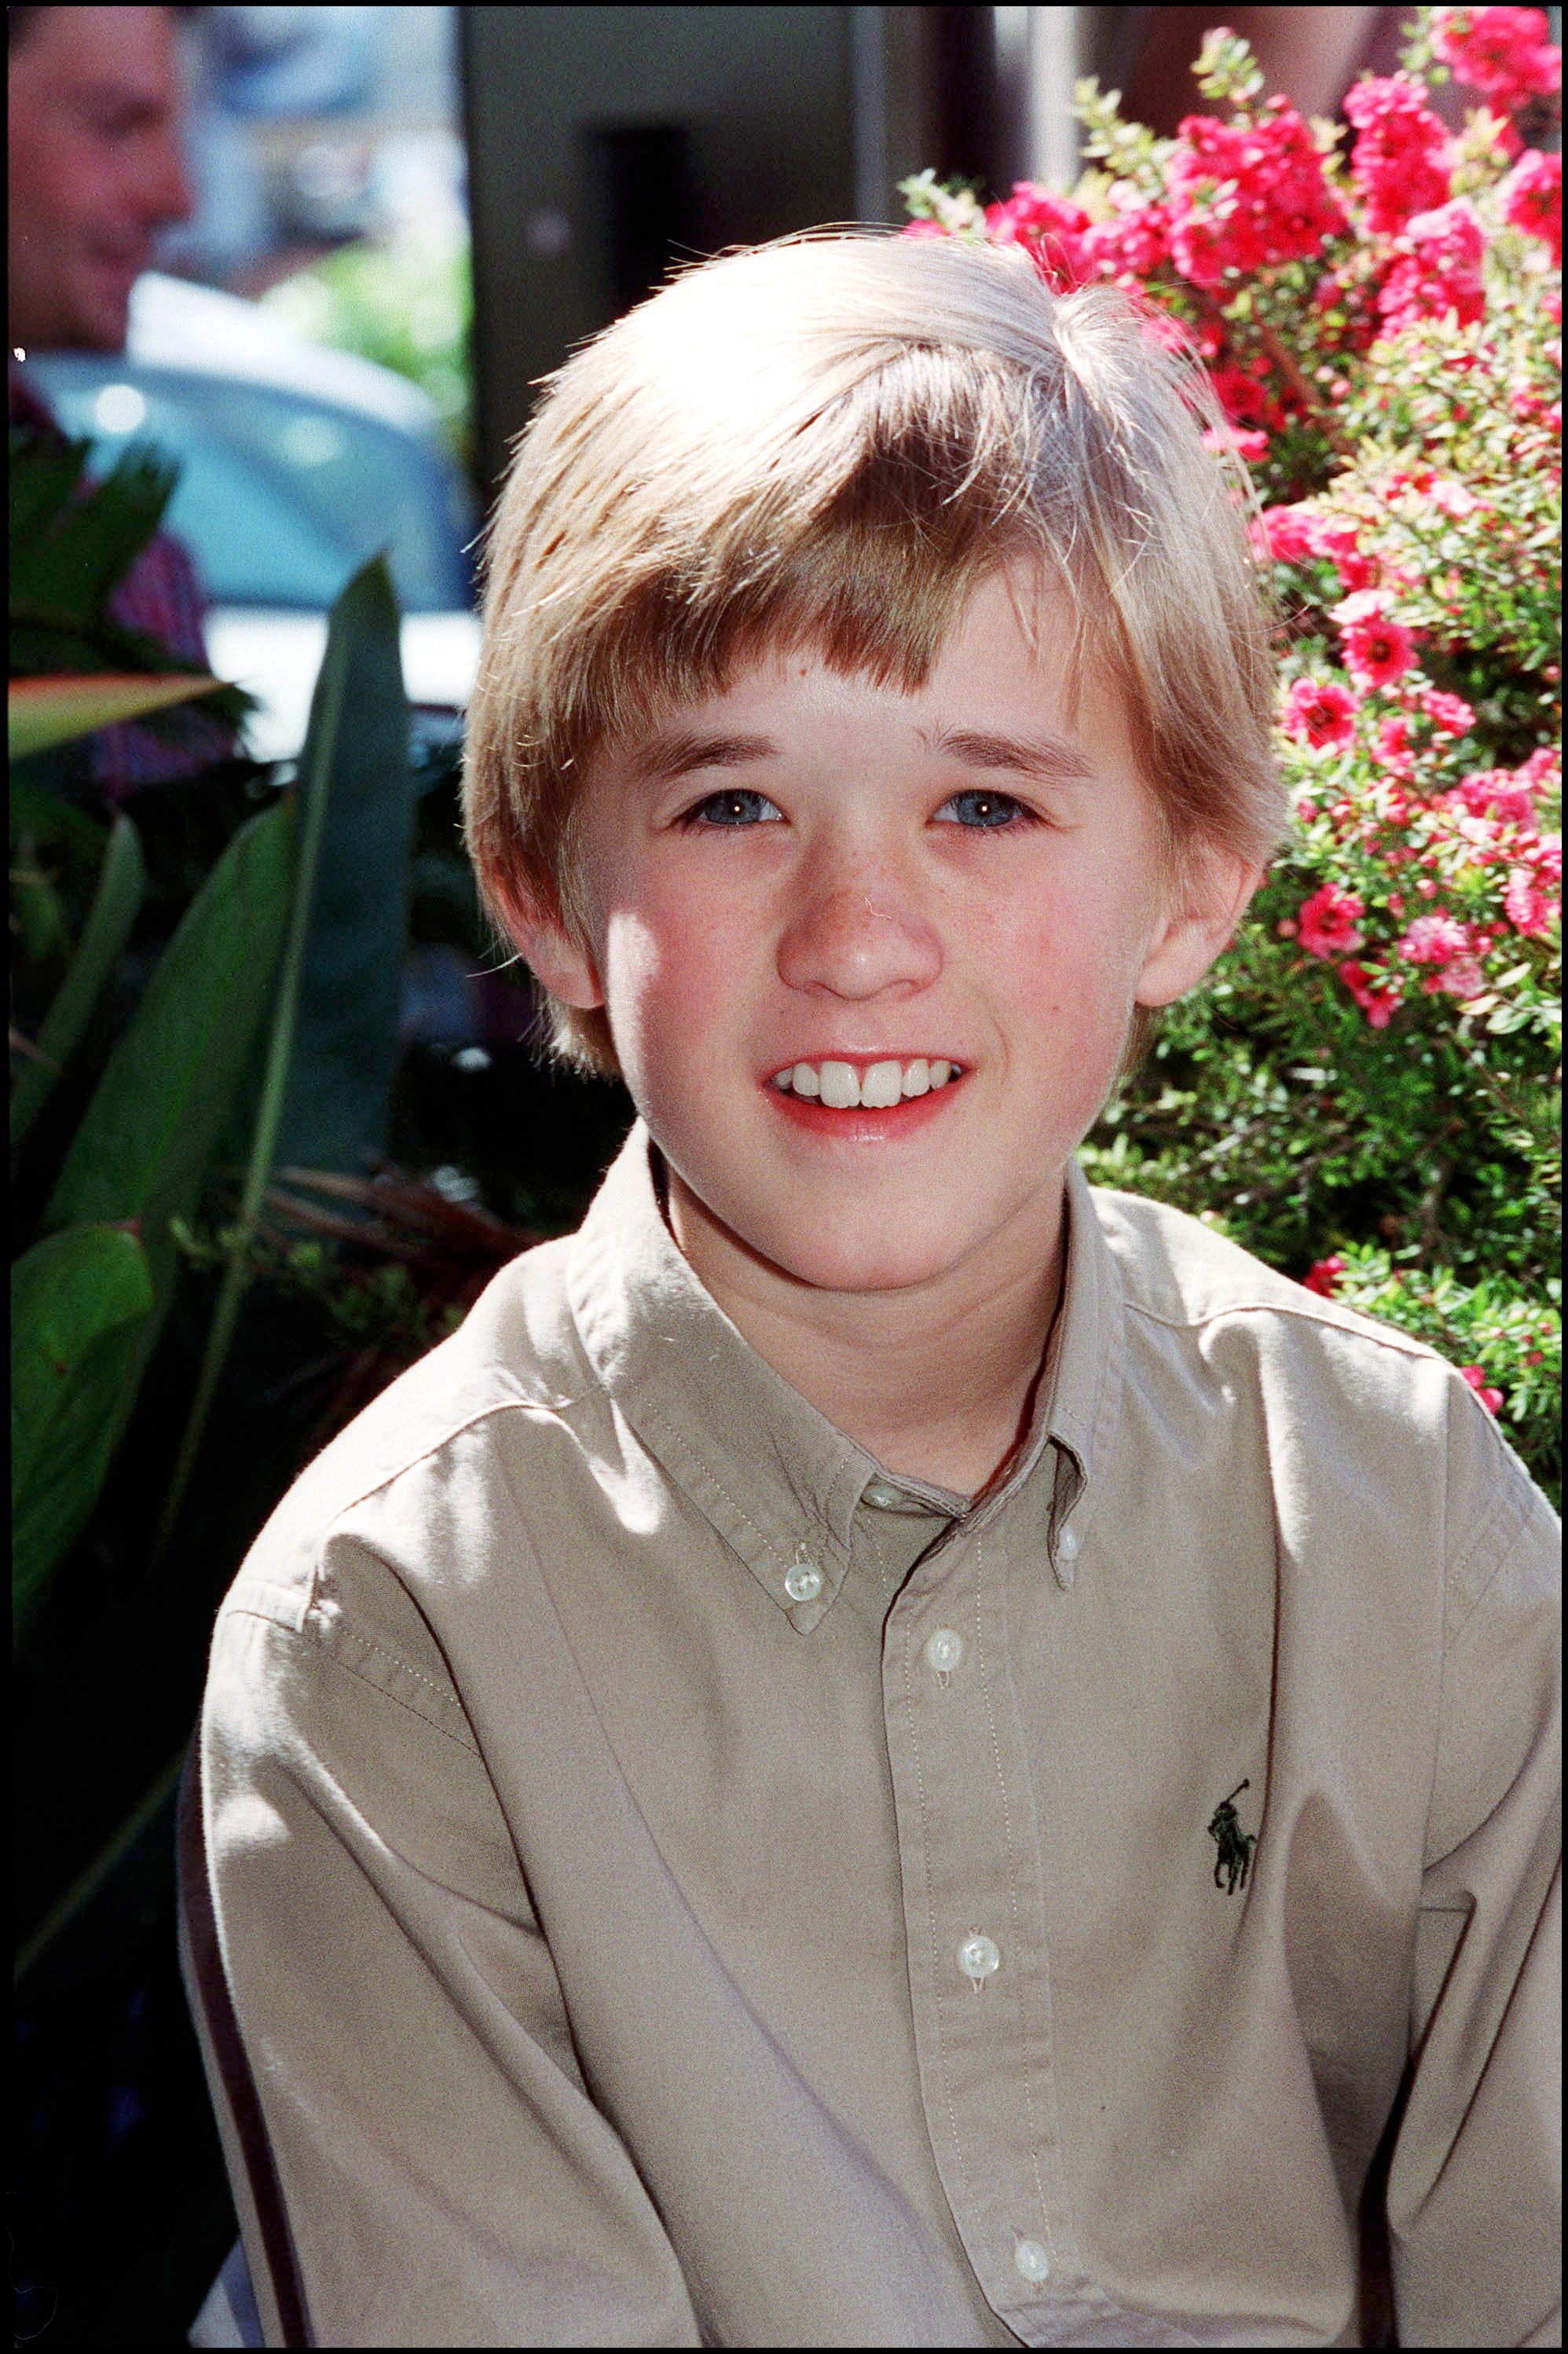 Haley Osment at a photocall during the Cannes Film Festival on May 14, 2000 in Cannes, France. | Source: Getty Images